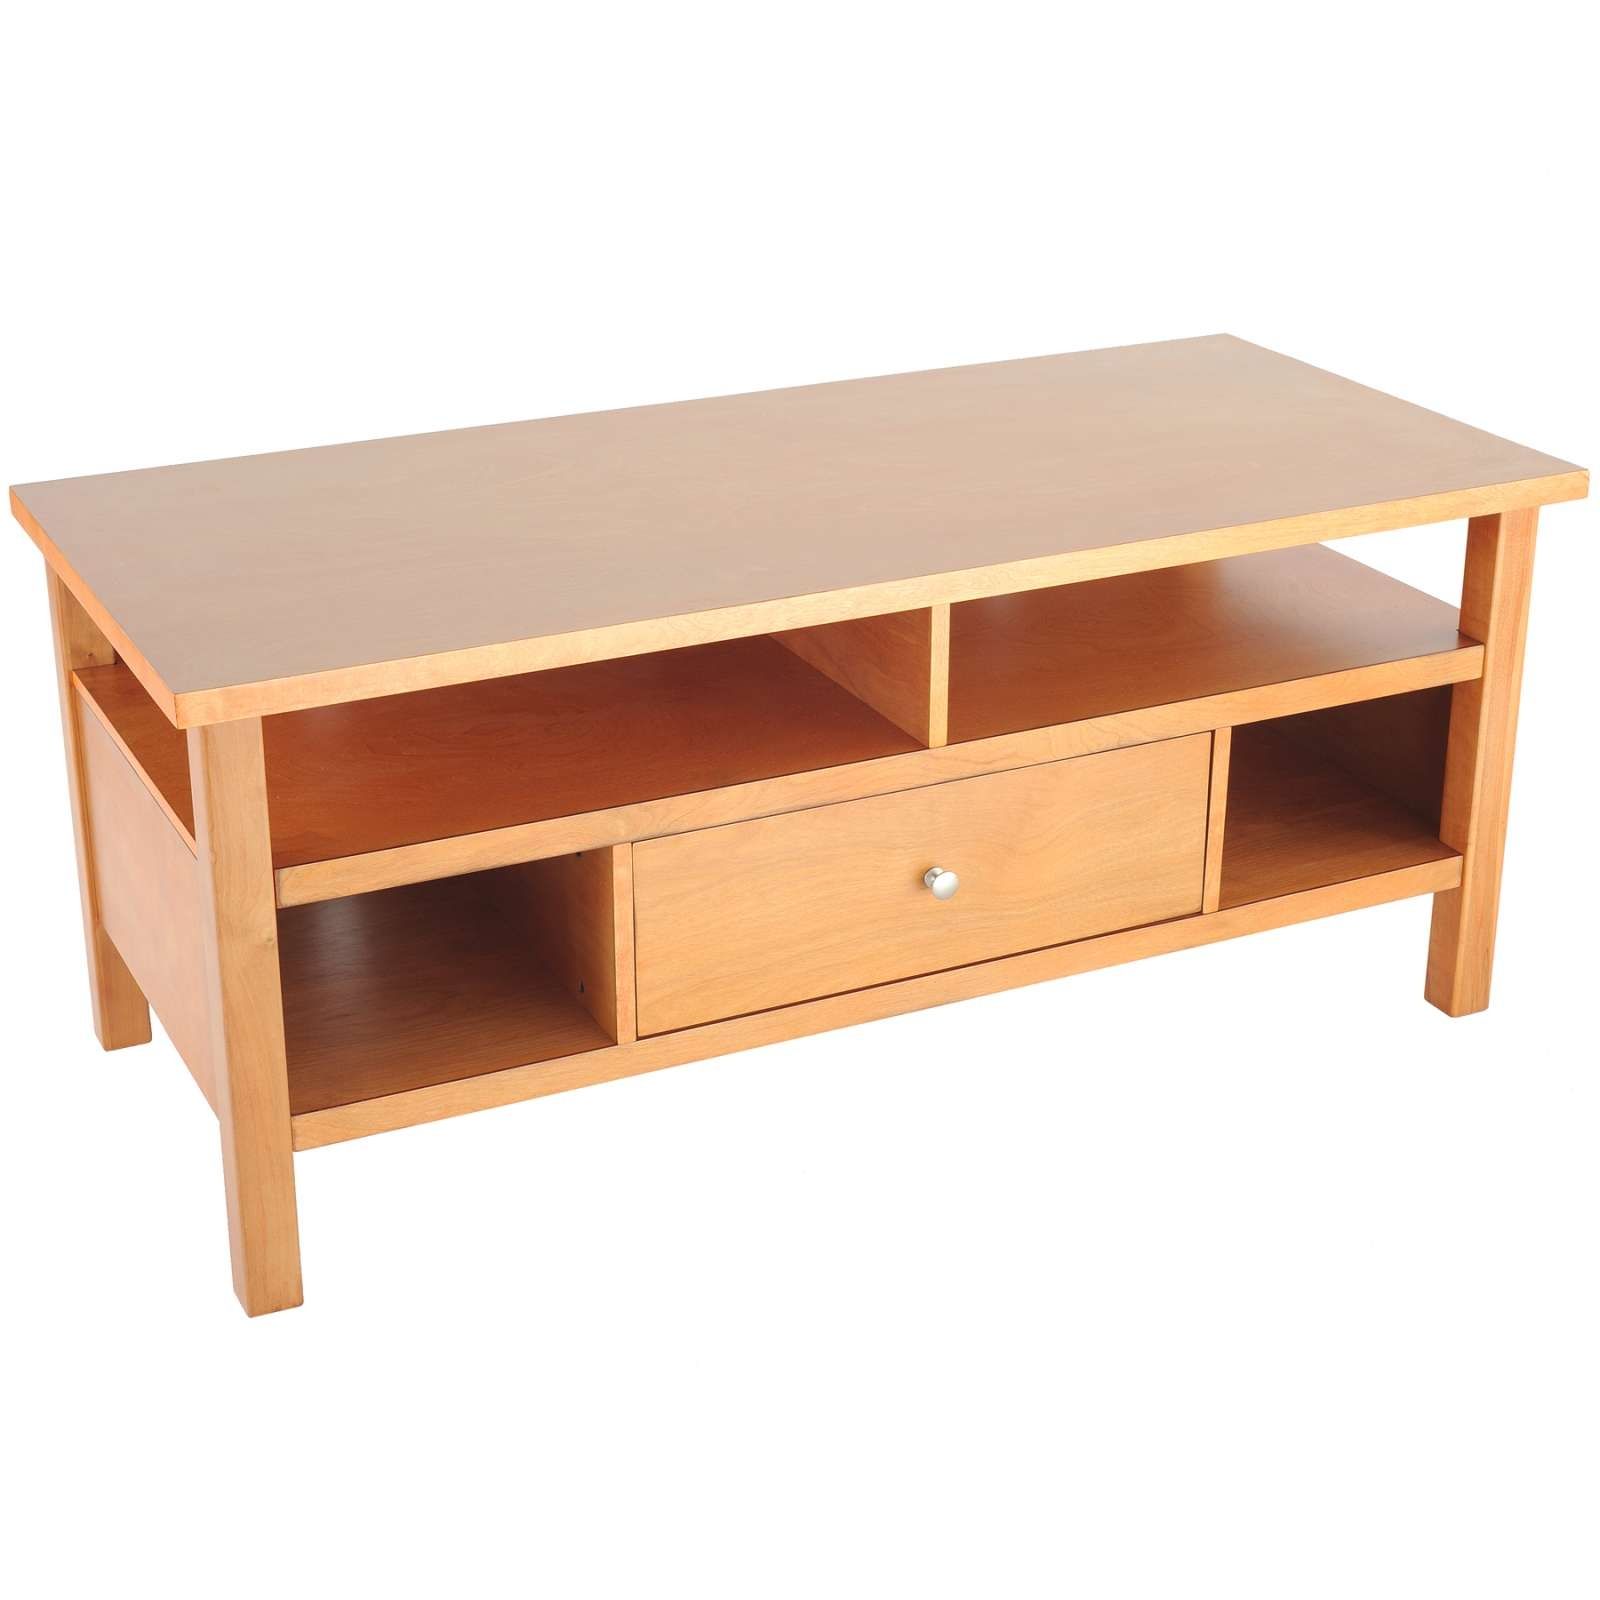 Maple Tv Stand For Maple Tv Stands (Gallery 1 of 20)